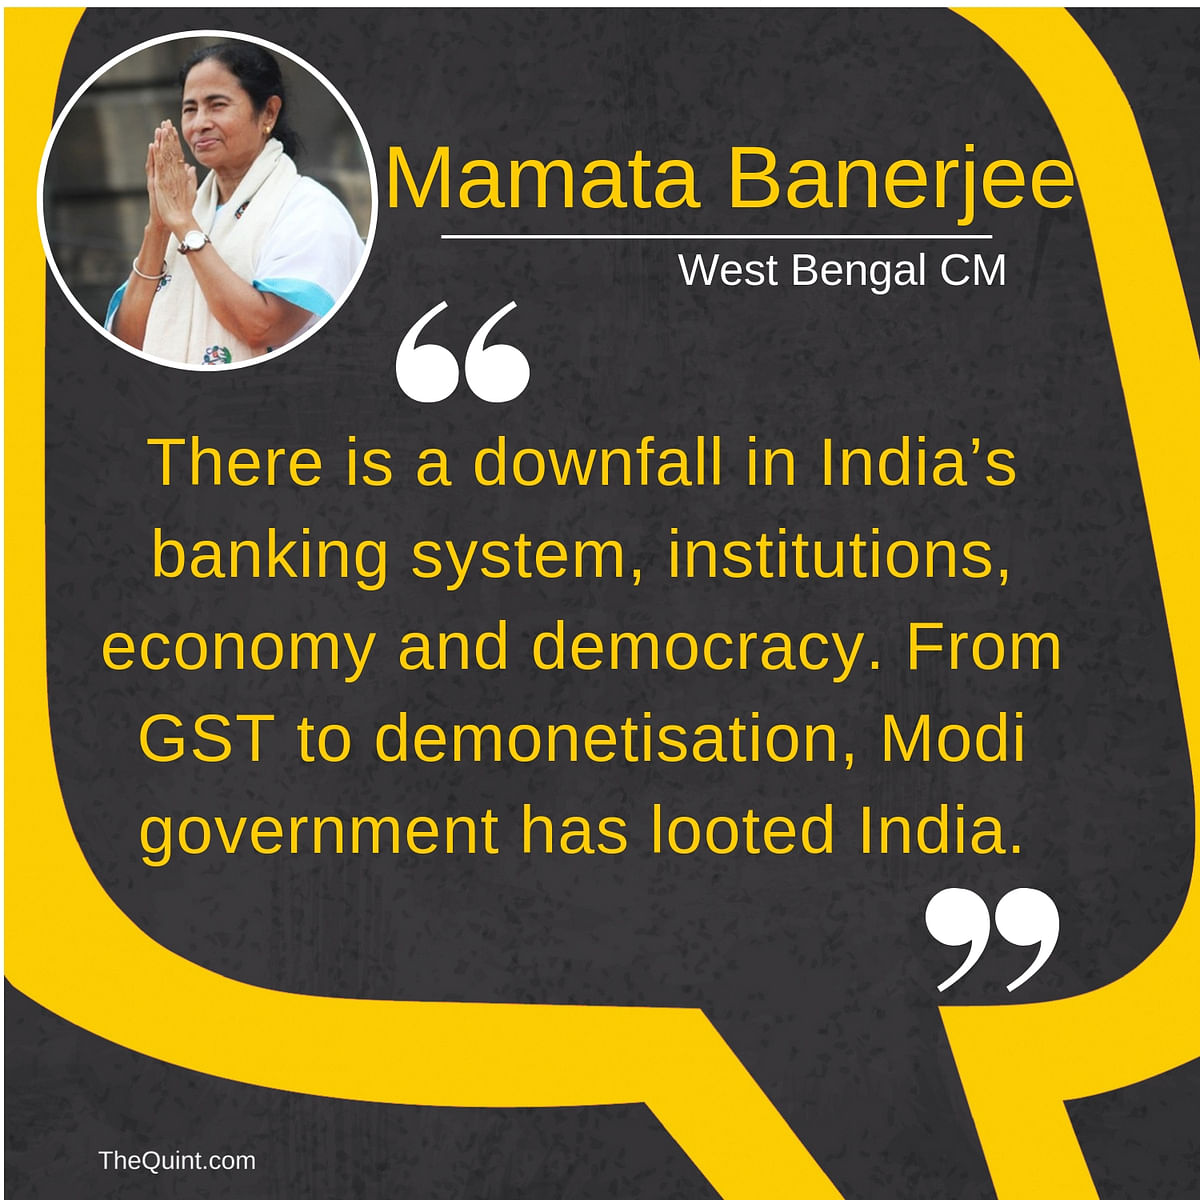 At the Kolkata Mega rally, Mamata said the BJP’s expiry date is over and it is time for a new govt at the Centre.